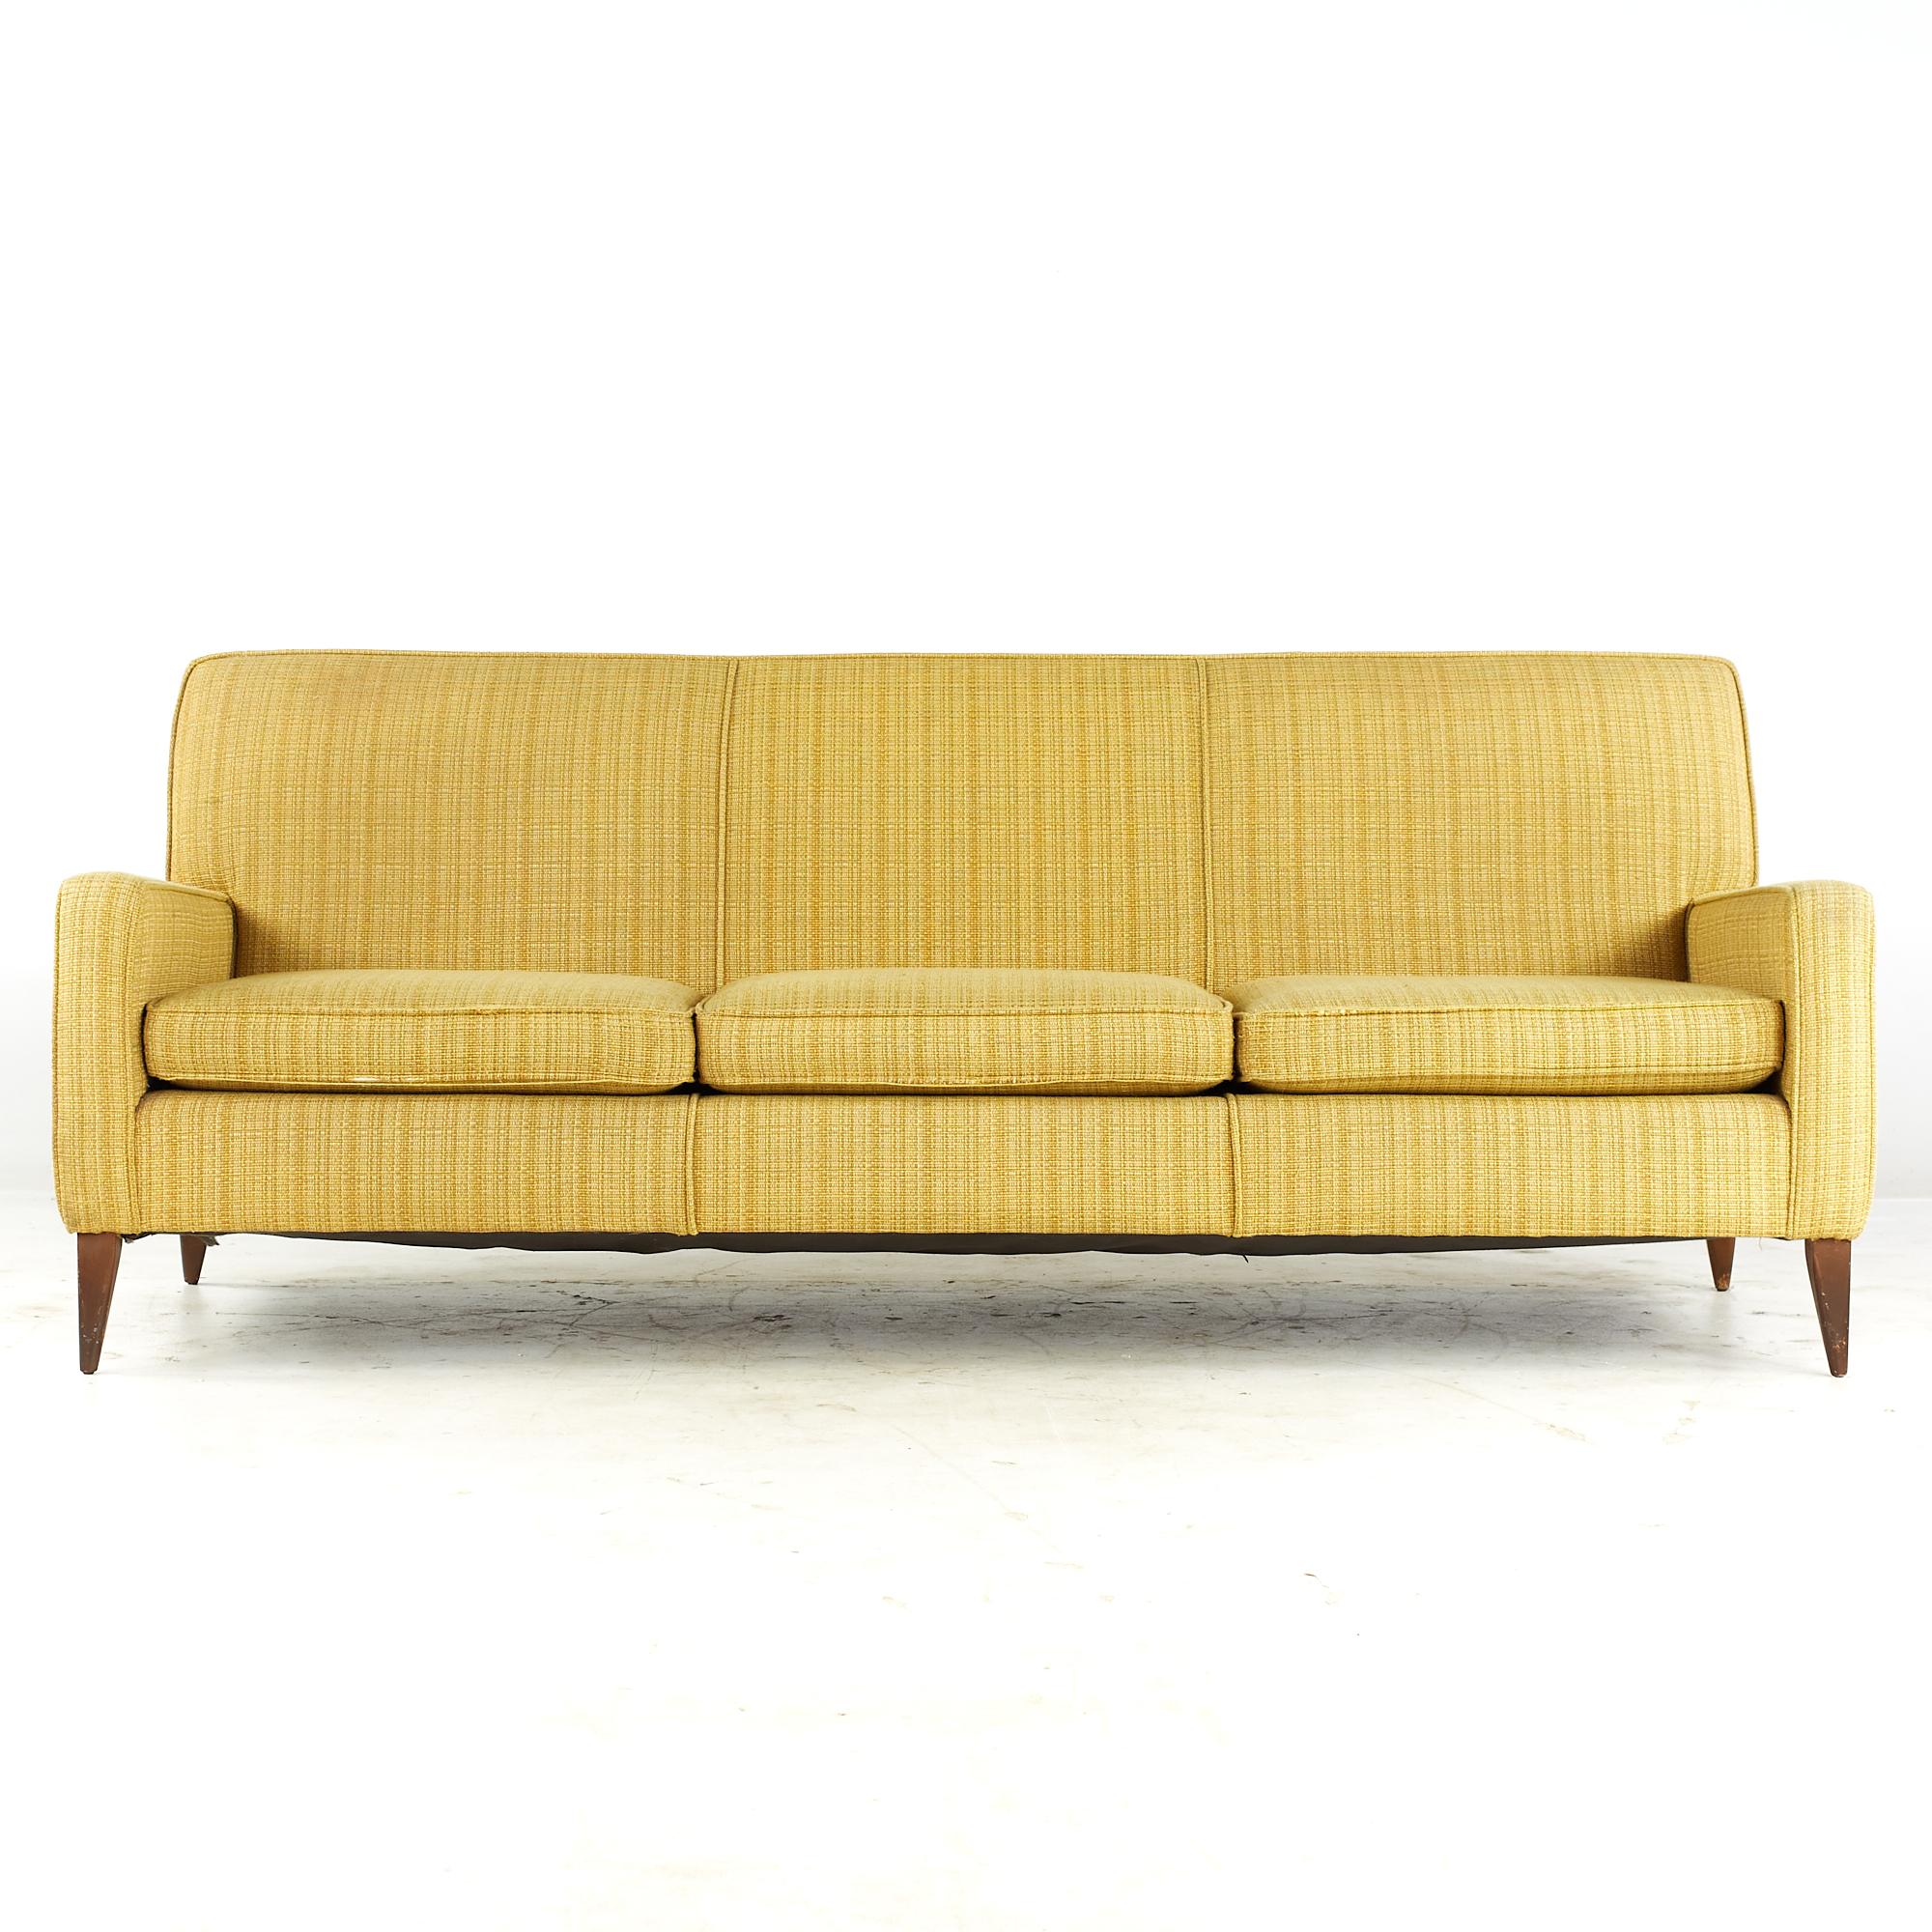 Paul McCobb for Planner Group midcentury Sofa.

This sofa measures: 75.5 wide x 33 deep x 30.5 inches high, with a seat height of 16 and arm height of 21 inches

All pieces of furniture can be had in what we call restored vintage condition. That